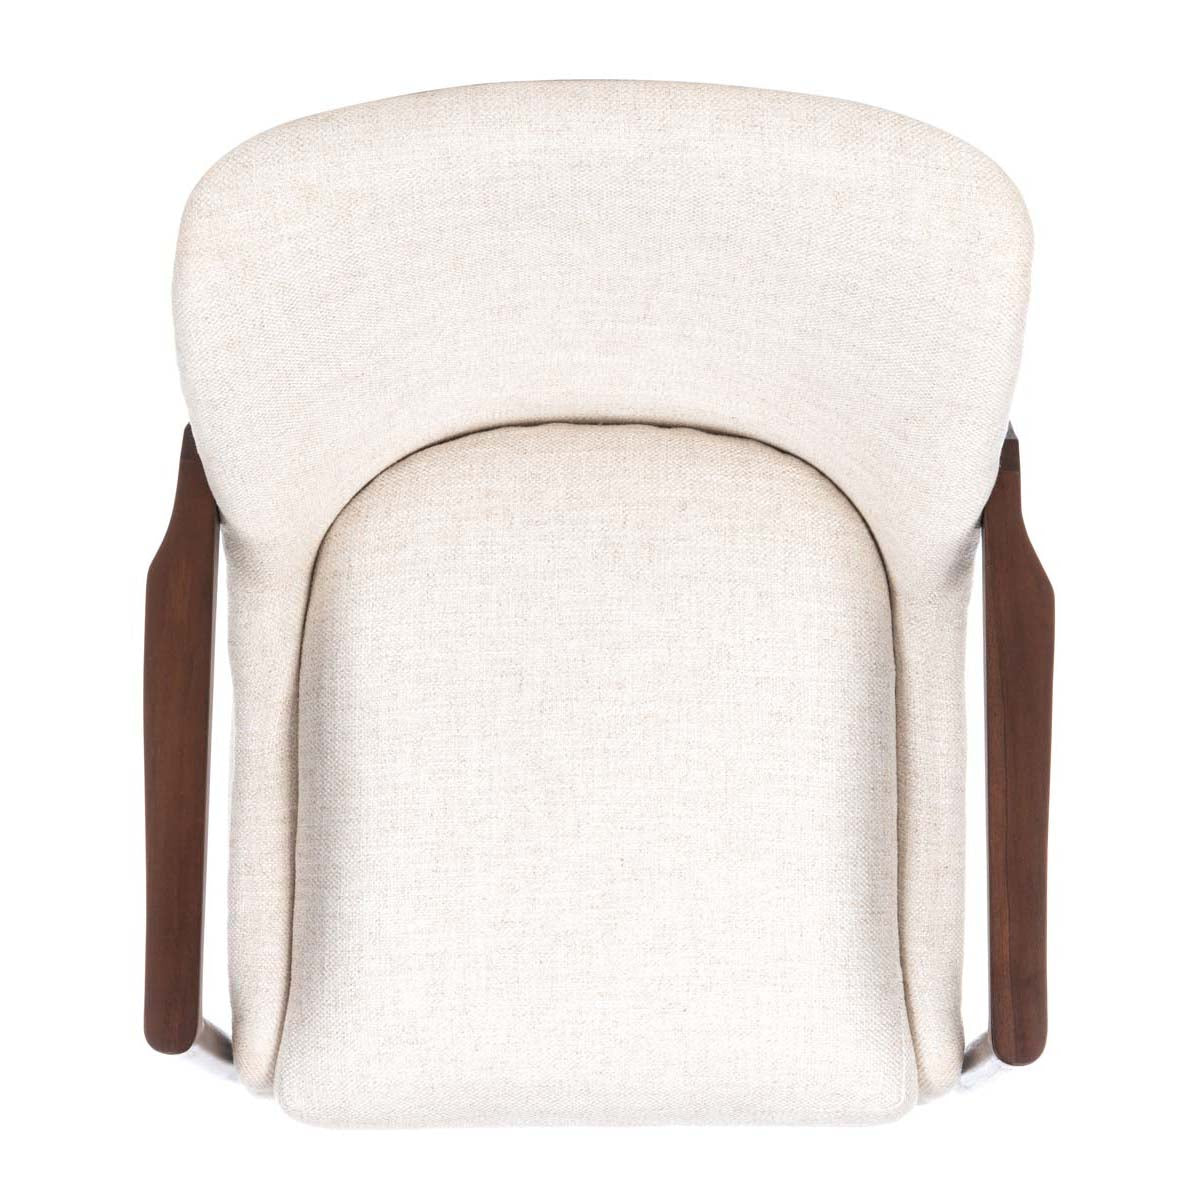 Safavieh Couture Flannery Mid Century Accent Chair - Cream